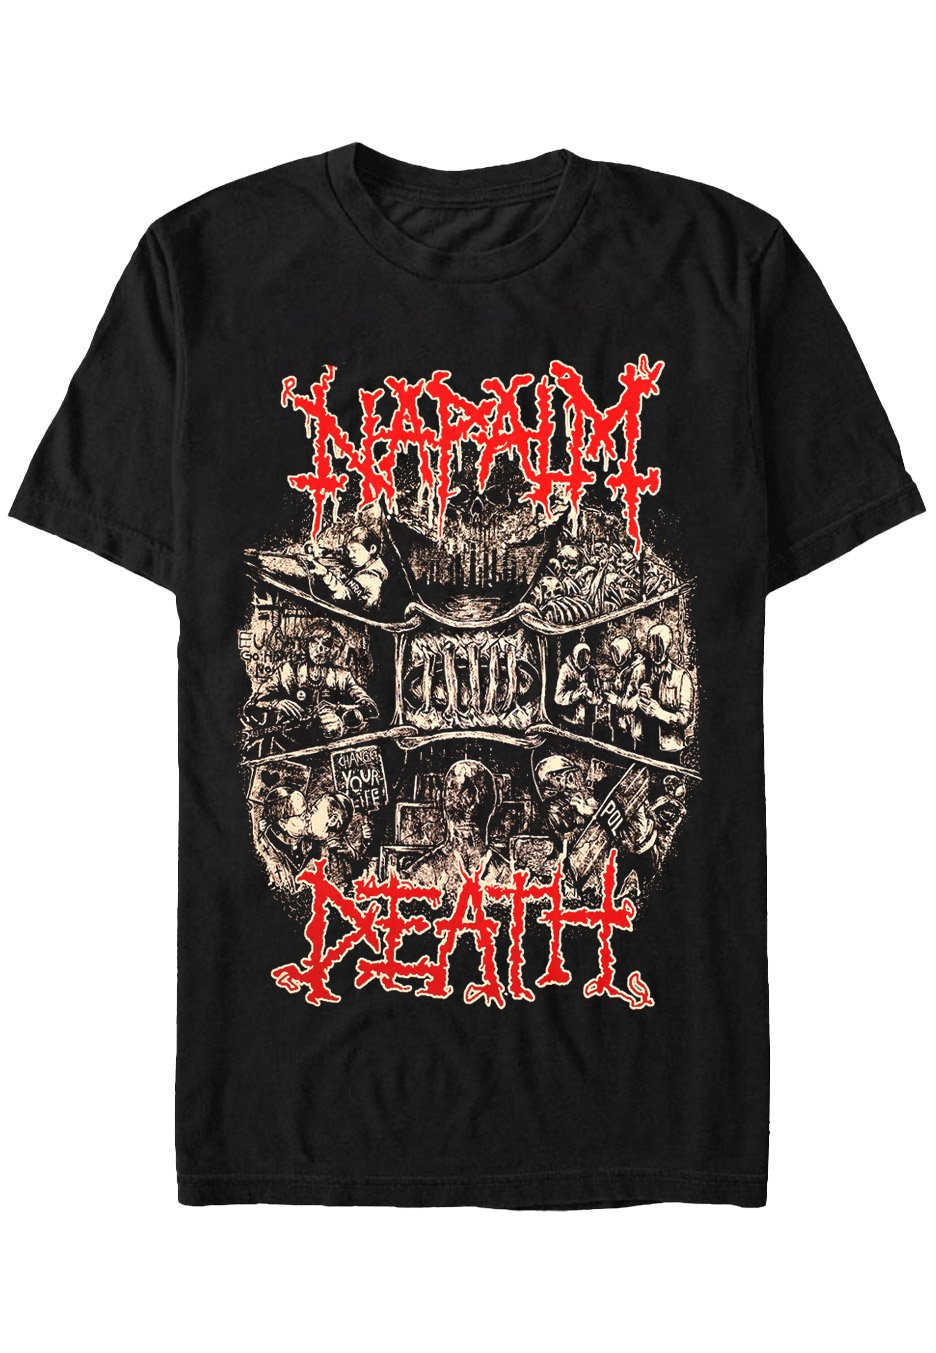 Napalm Death - Coded Smears - T-Shirt